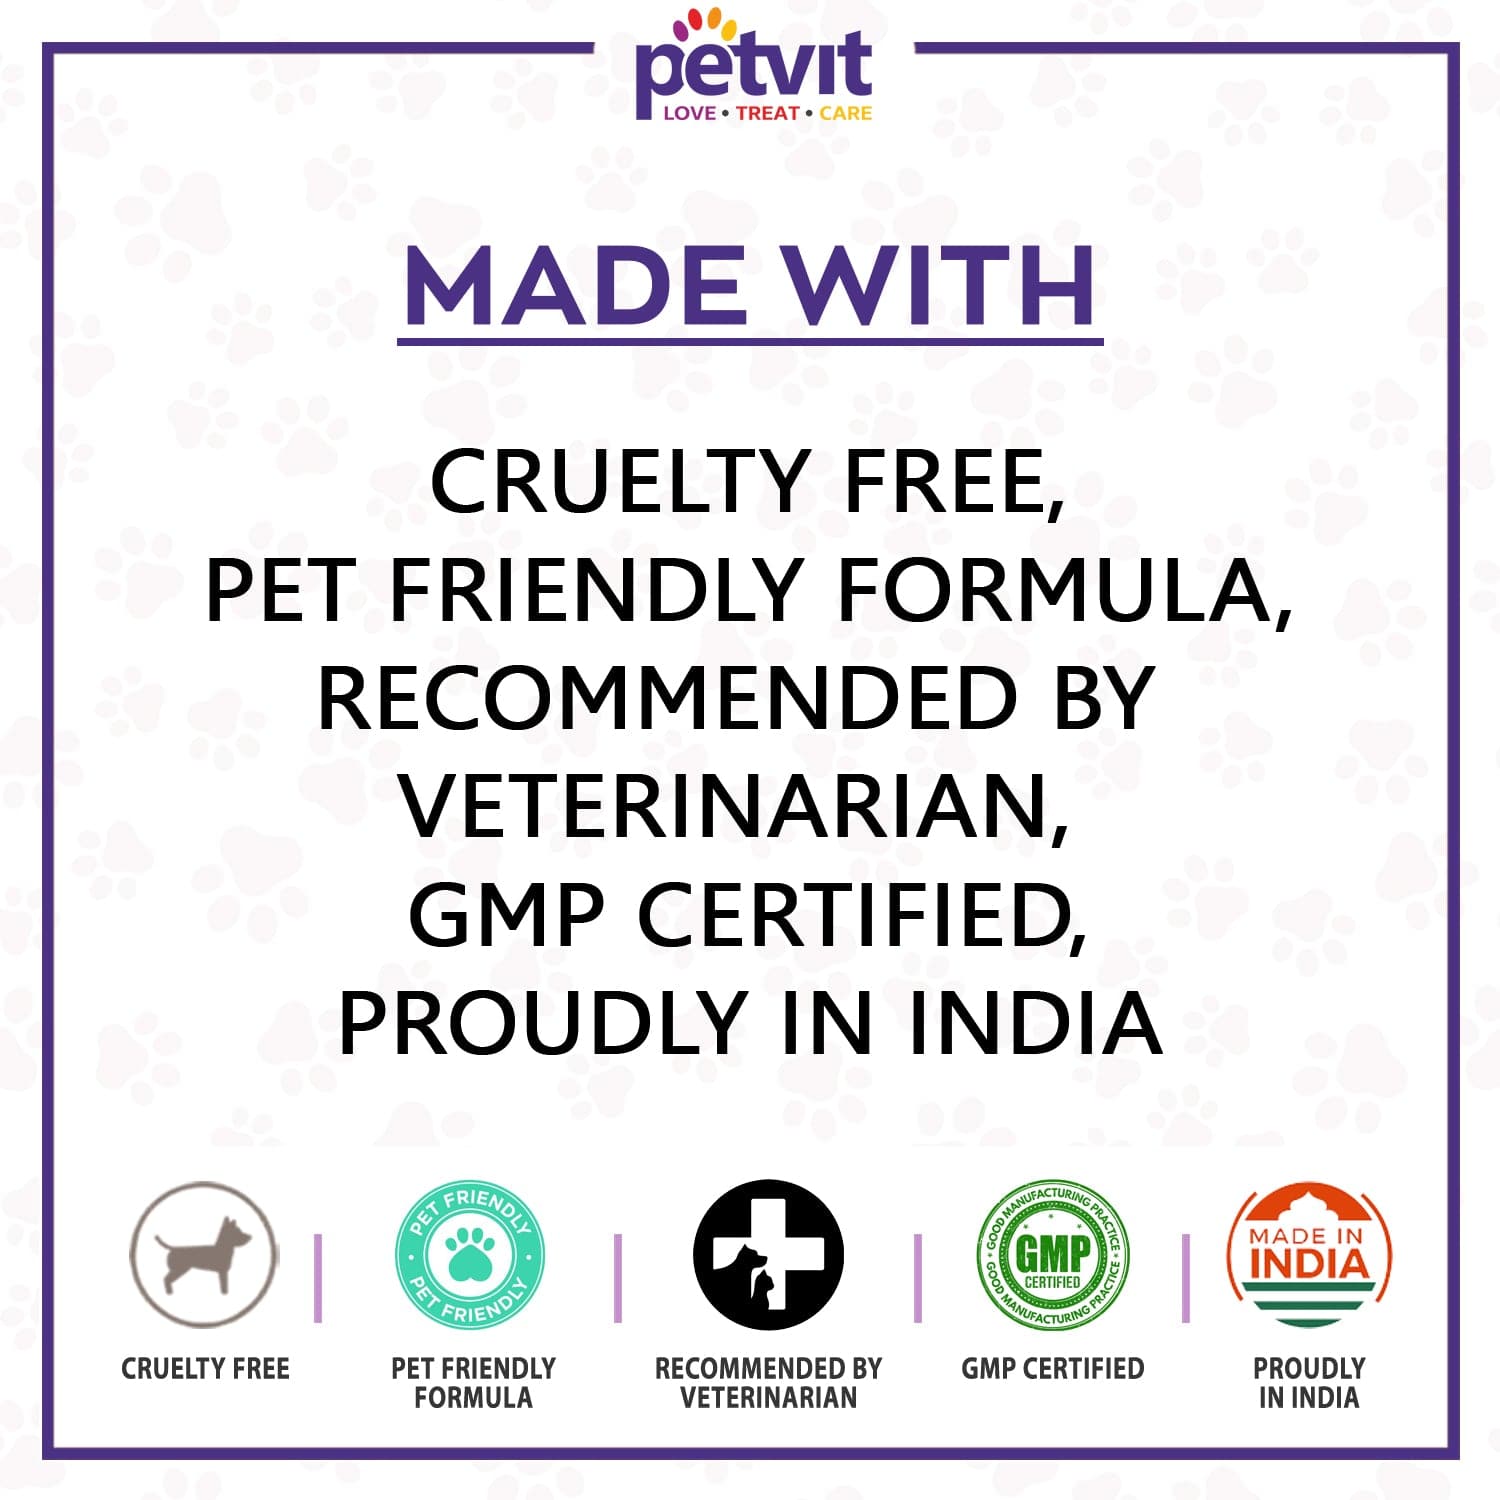 Petvit Kidney Support Powder for Dogs and Cats